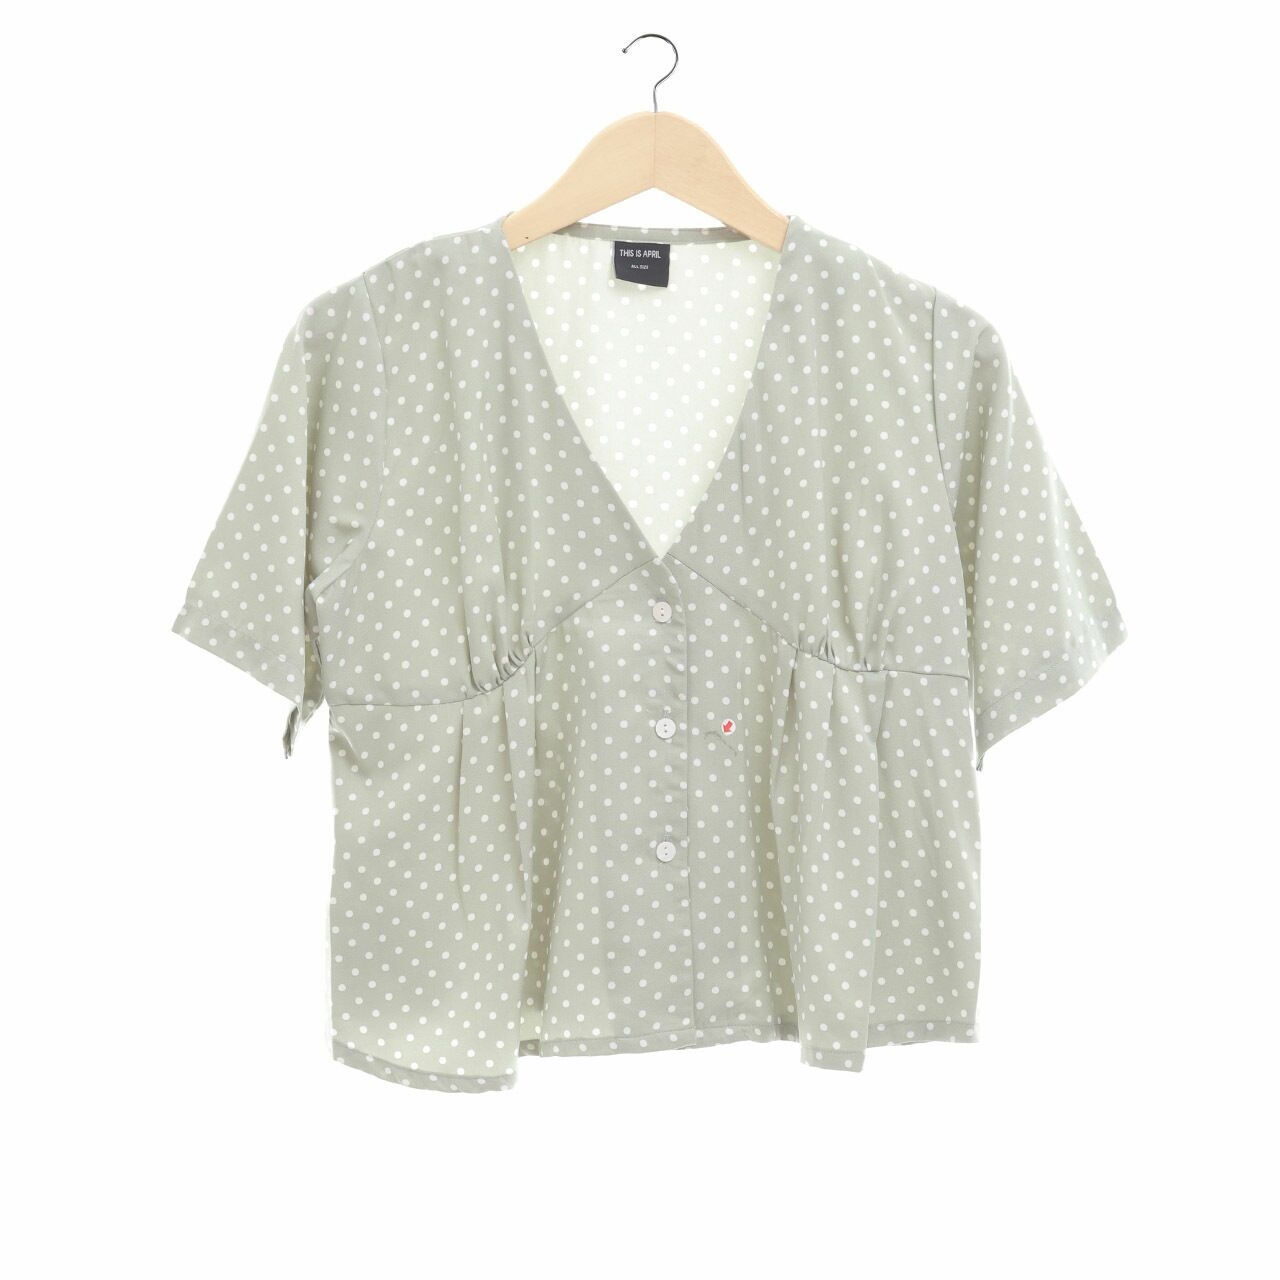 This is April Mint Polka Dot Blouse